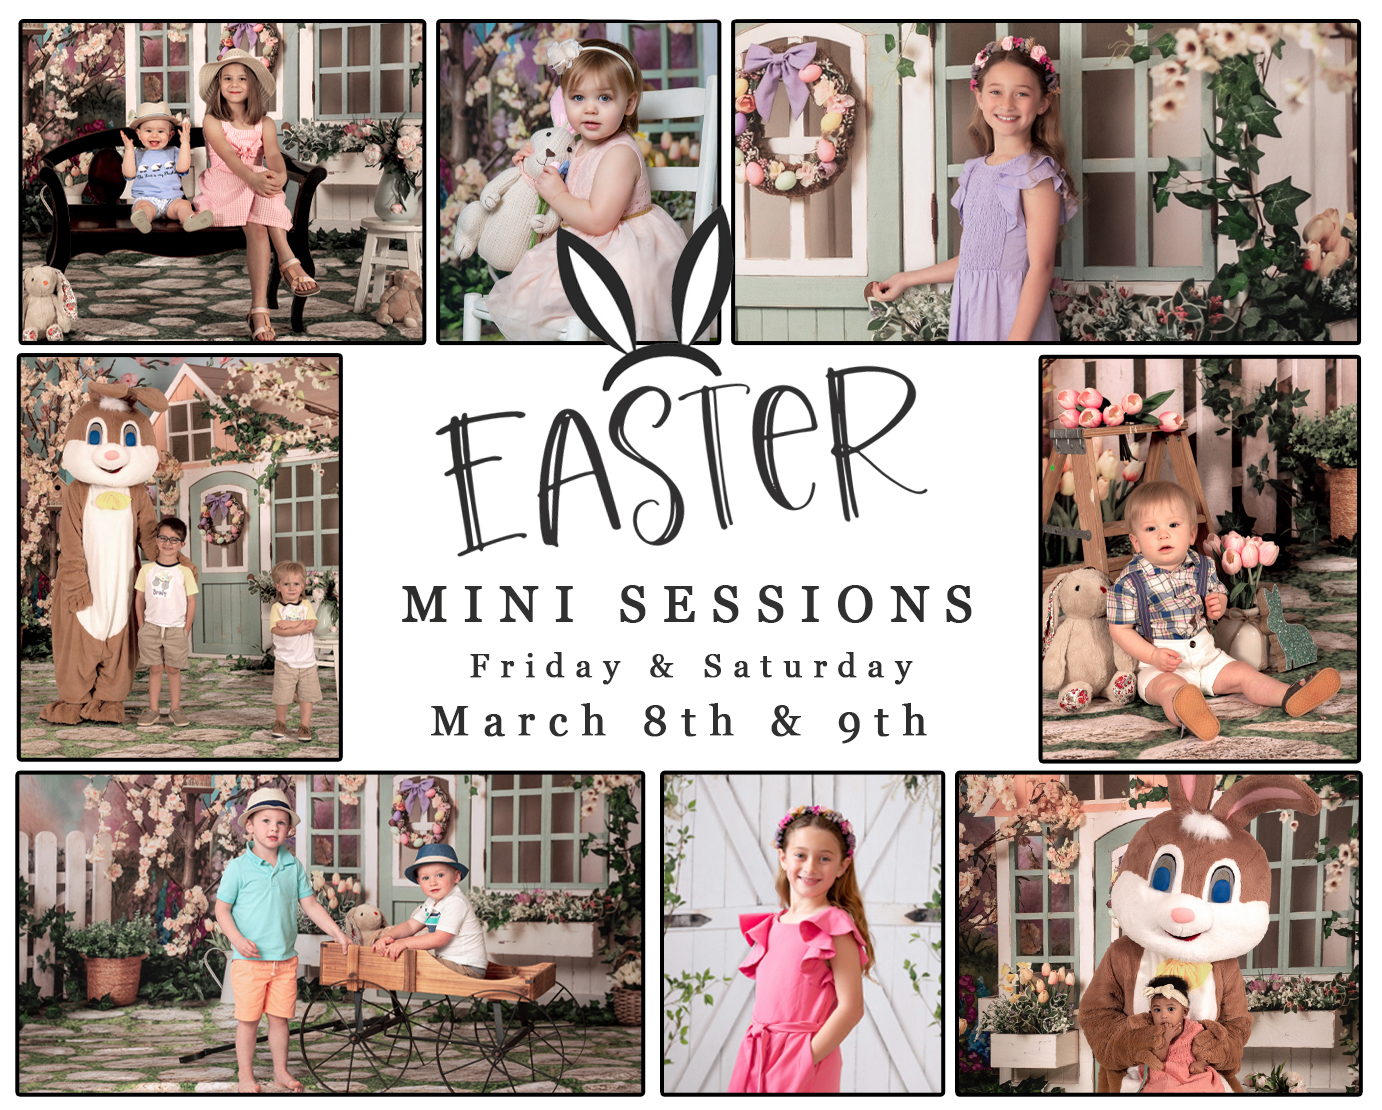 EASTER BUNNY & SPRING MINI SESSIONS